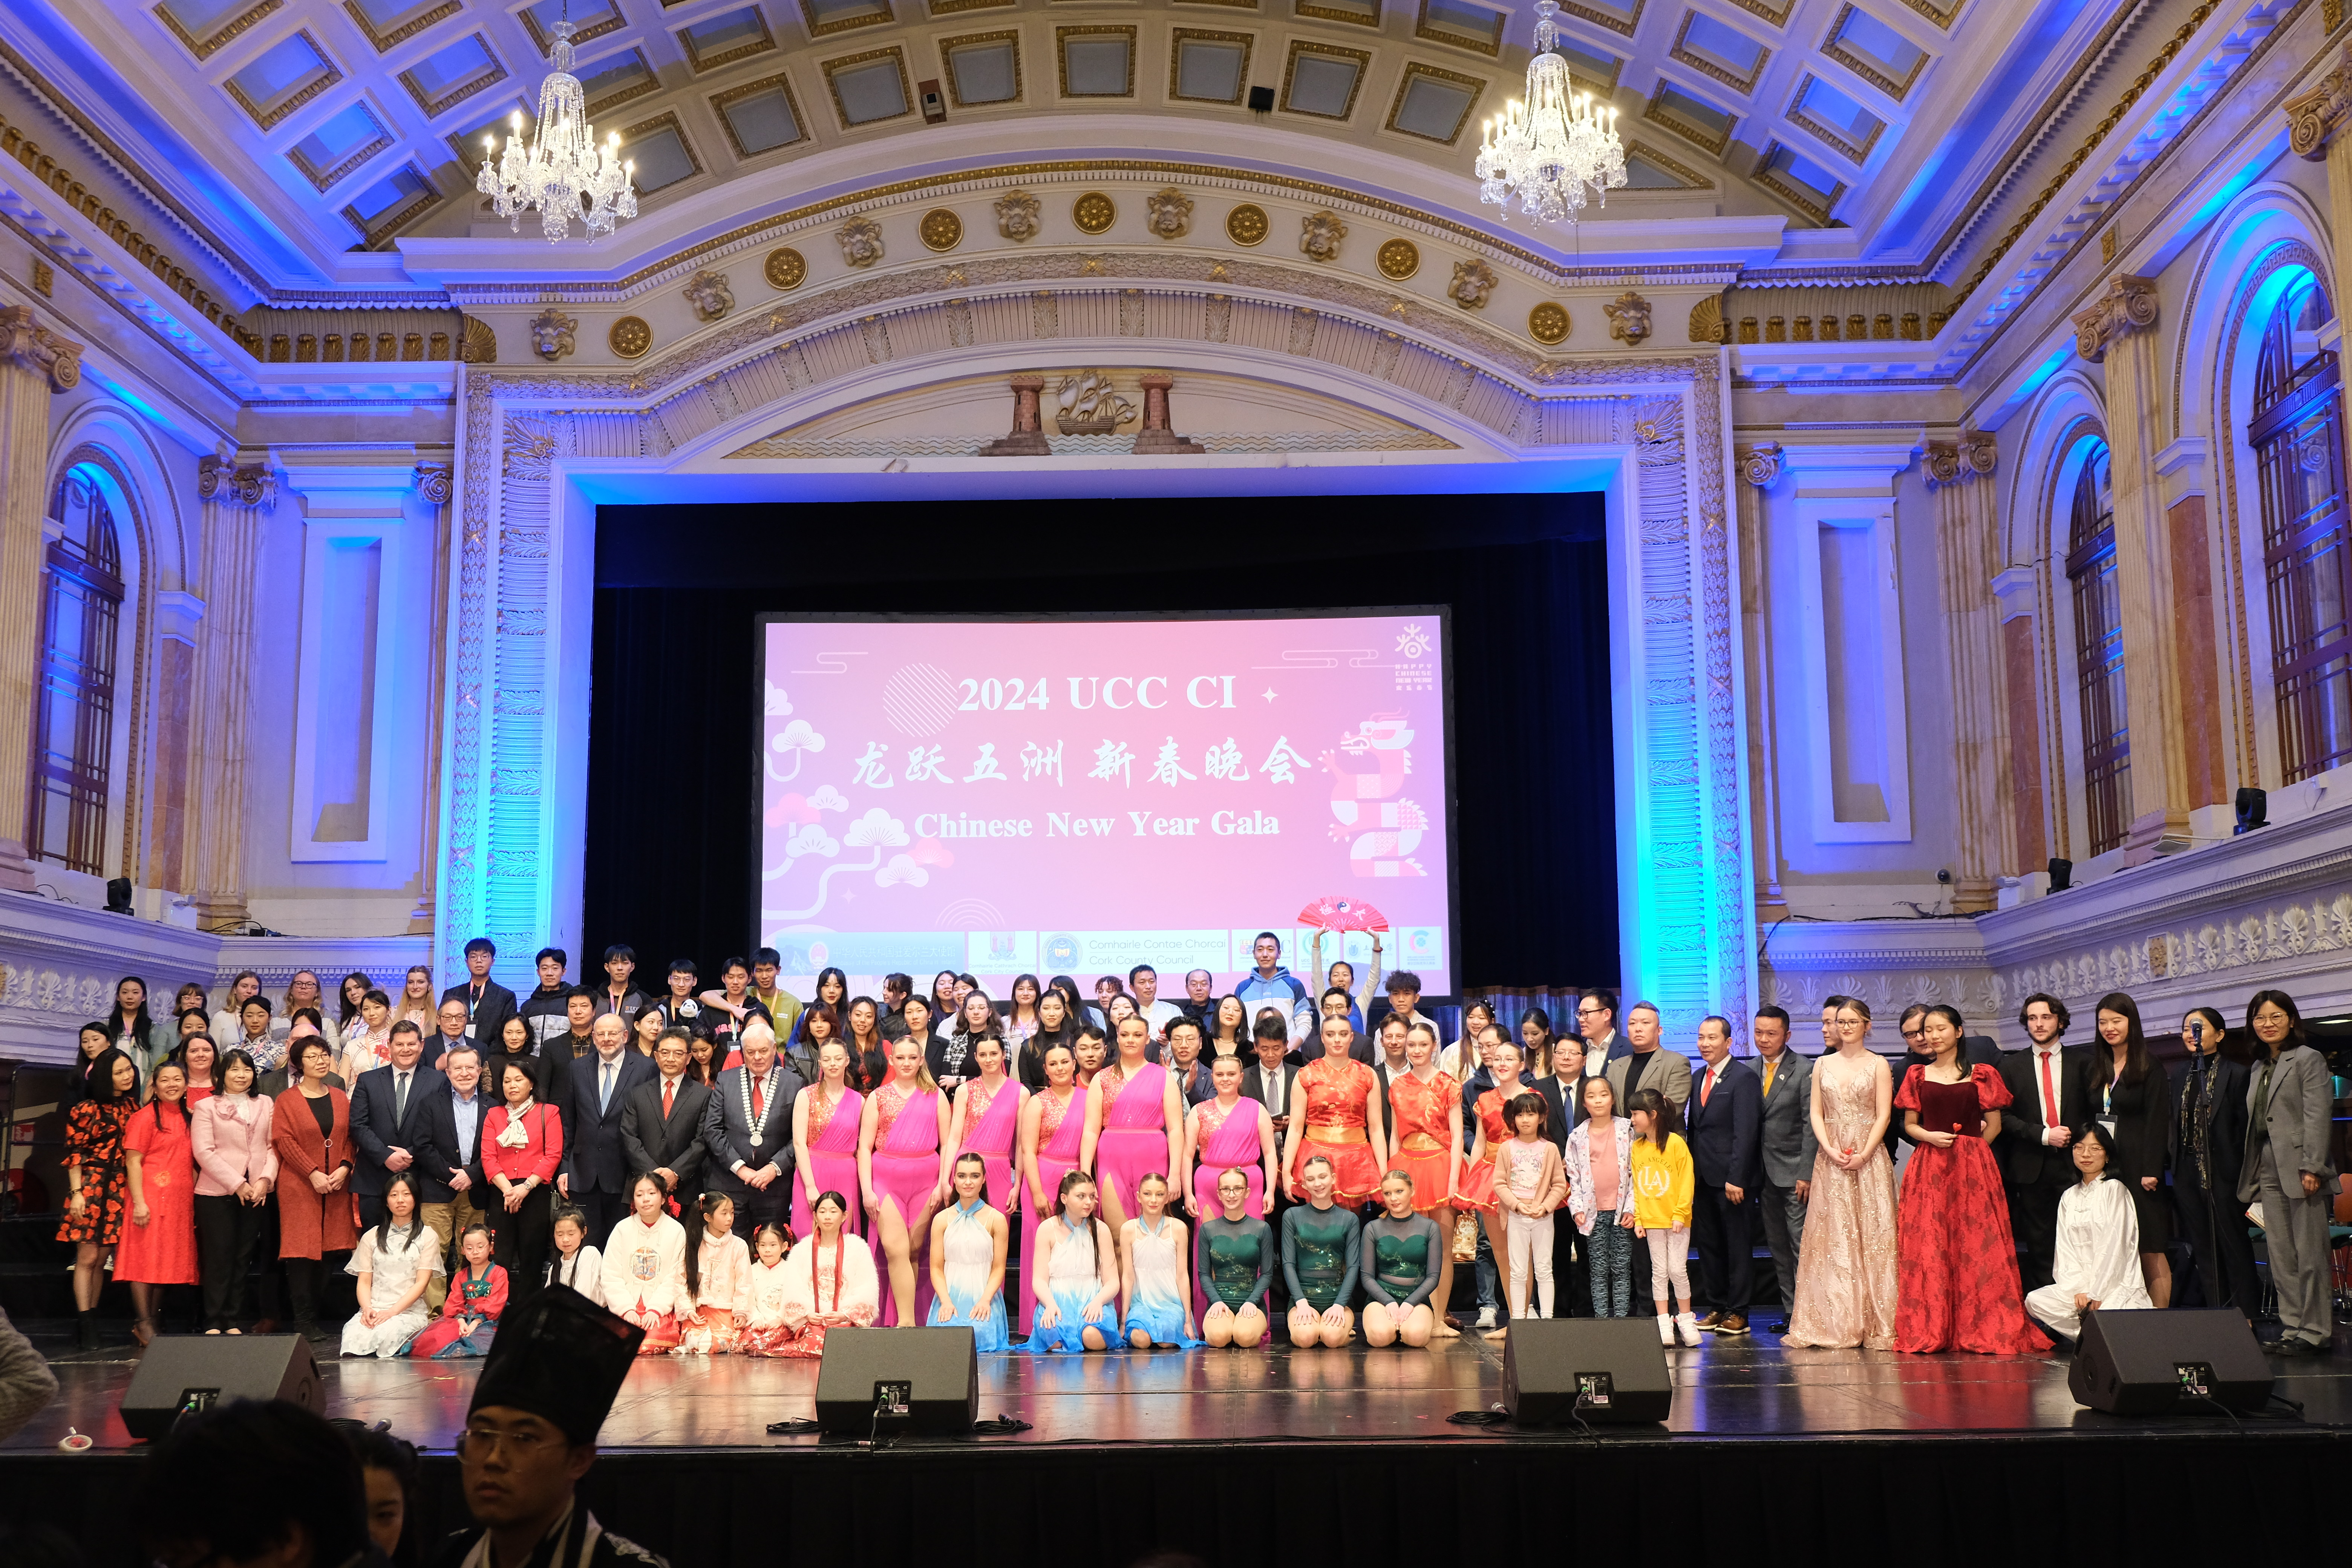 On February 15, 2024, UCC CI hosted a grand New Year celebration at Cork City Hall to mark the Chinese Lunar New Year of the Dragon.